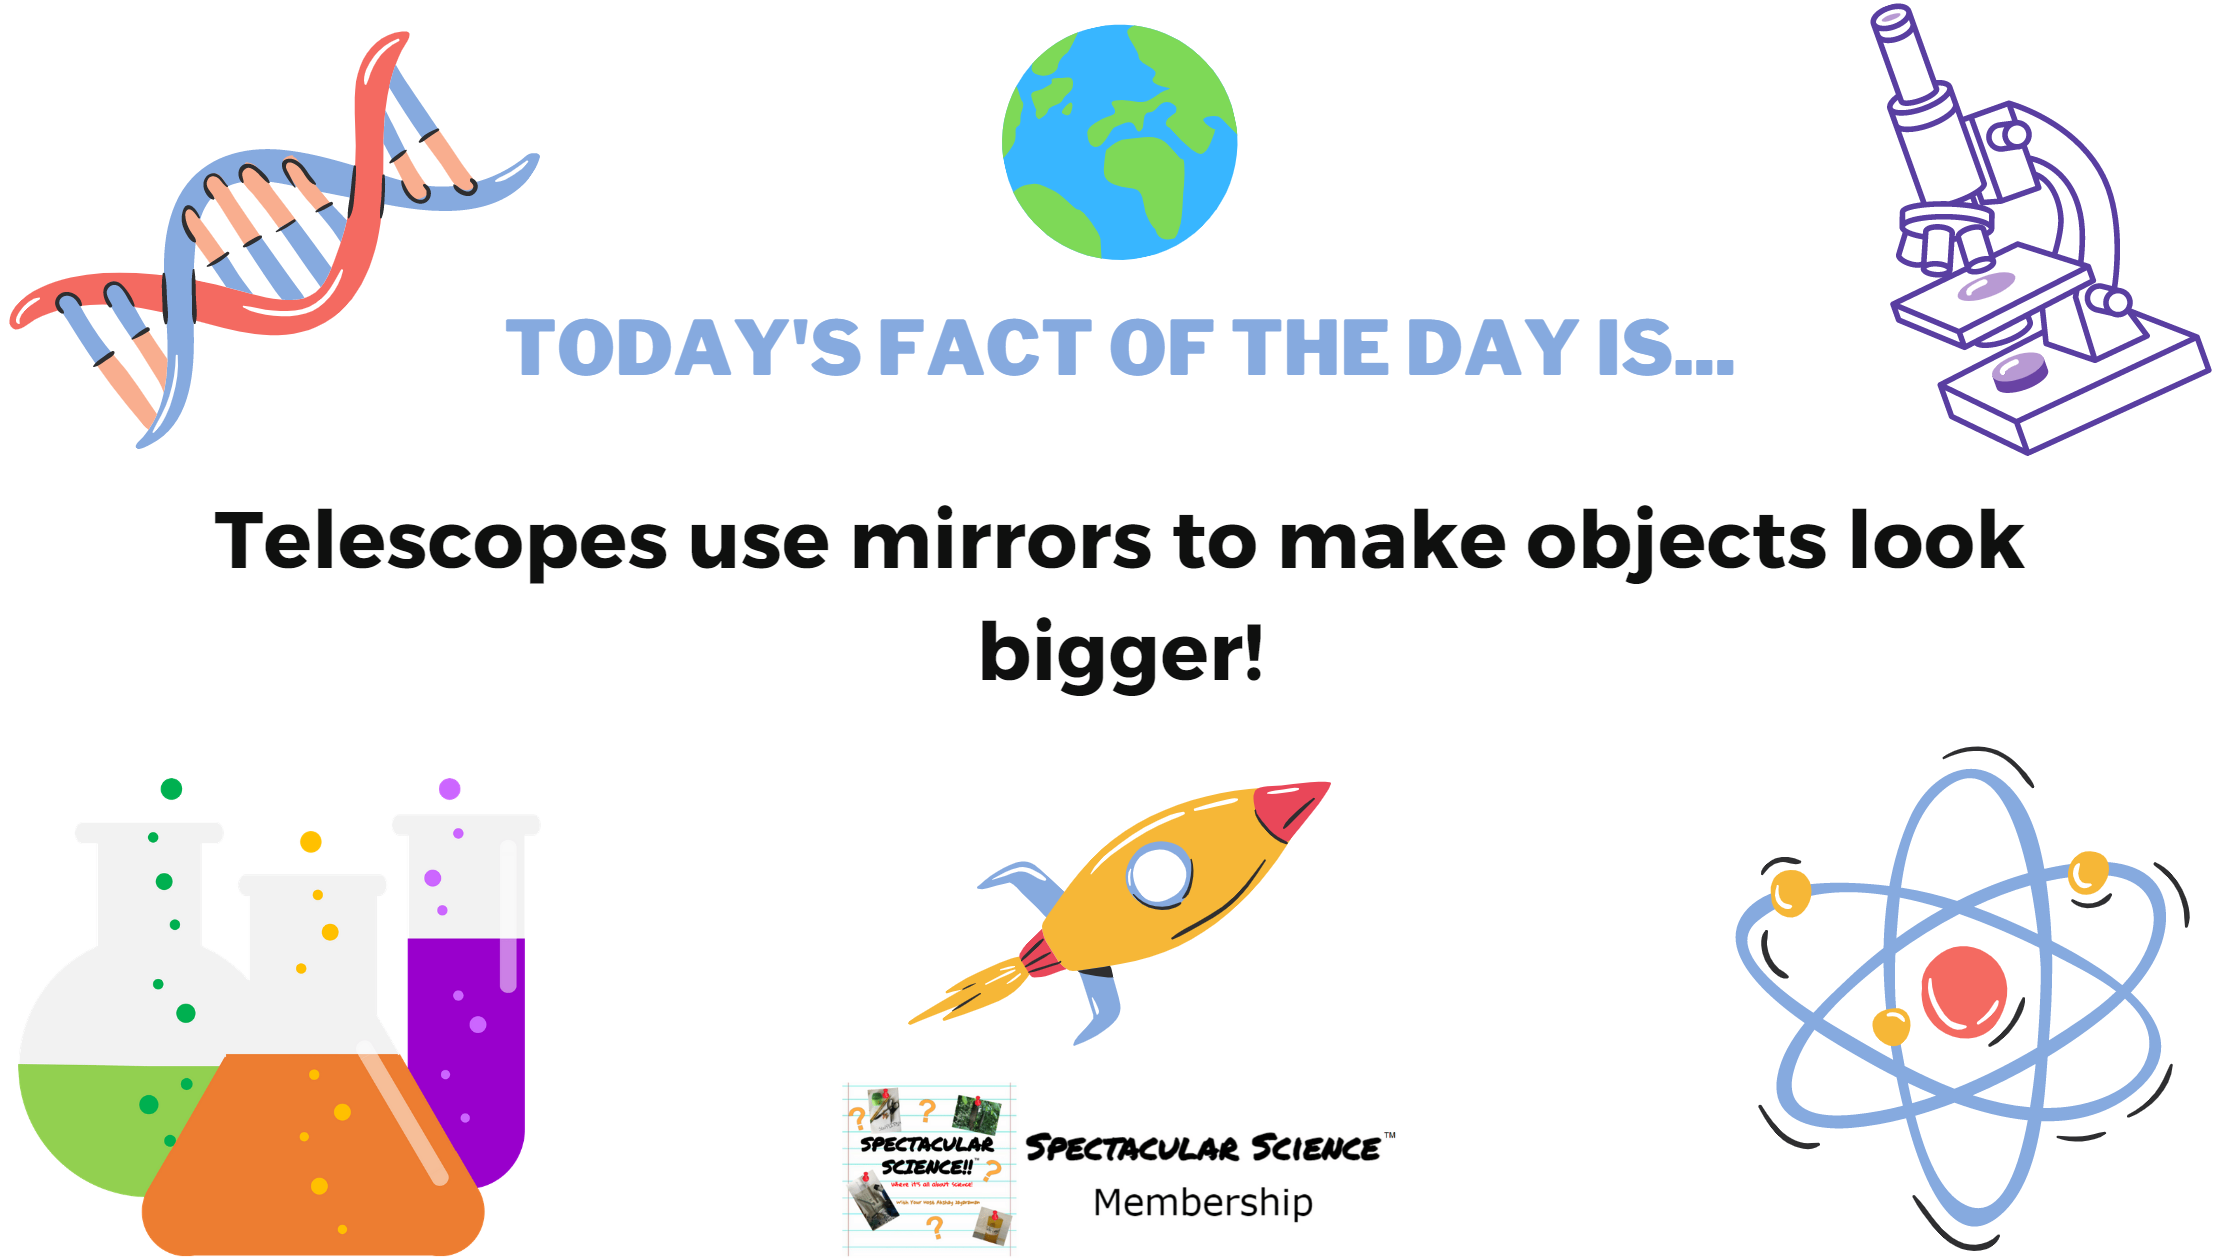 Fact of the Day Image May 17